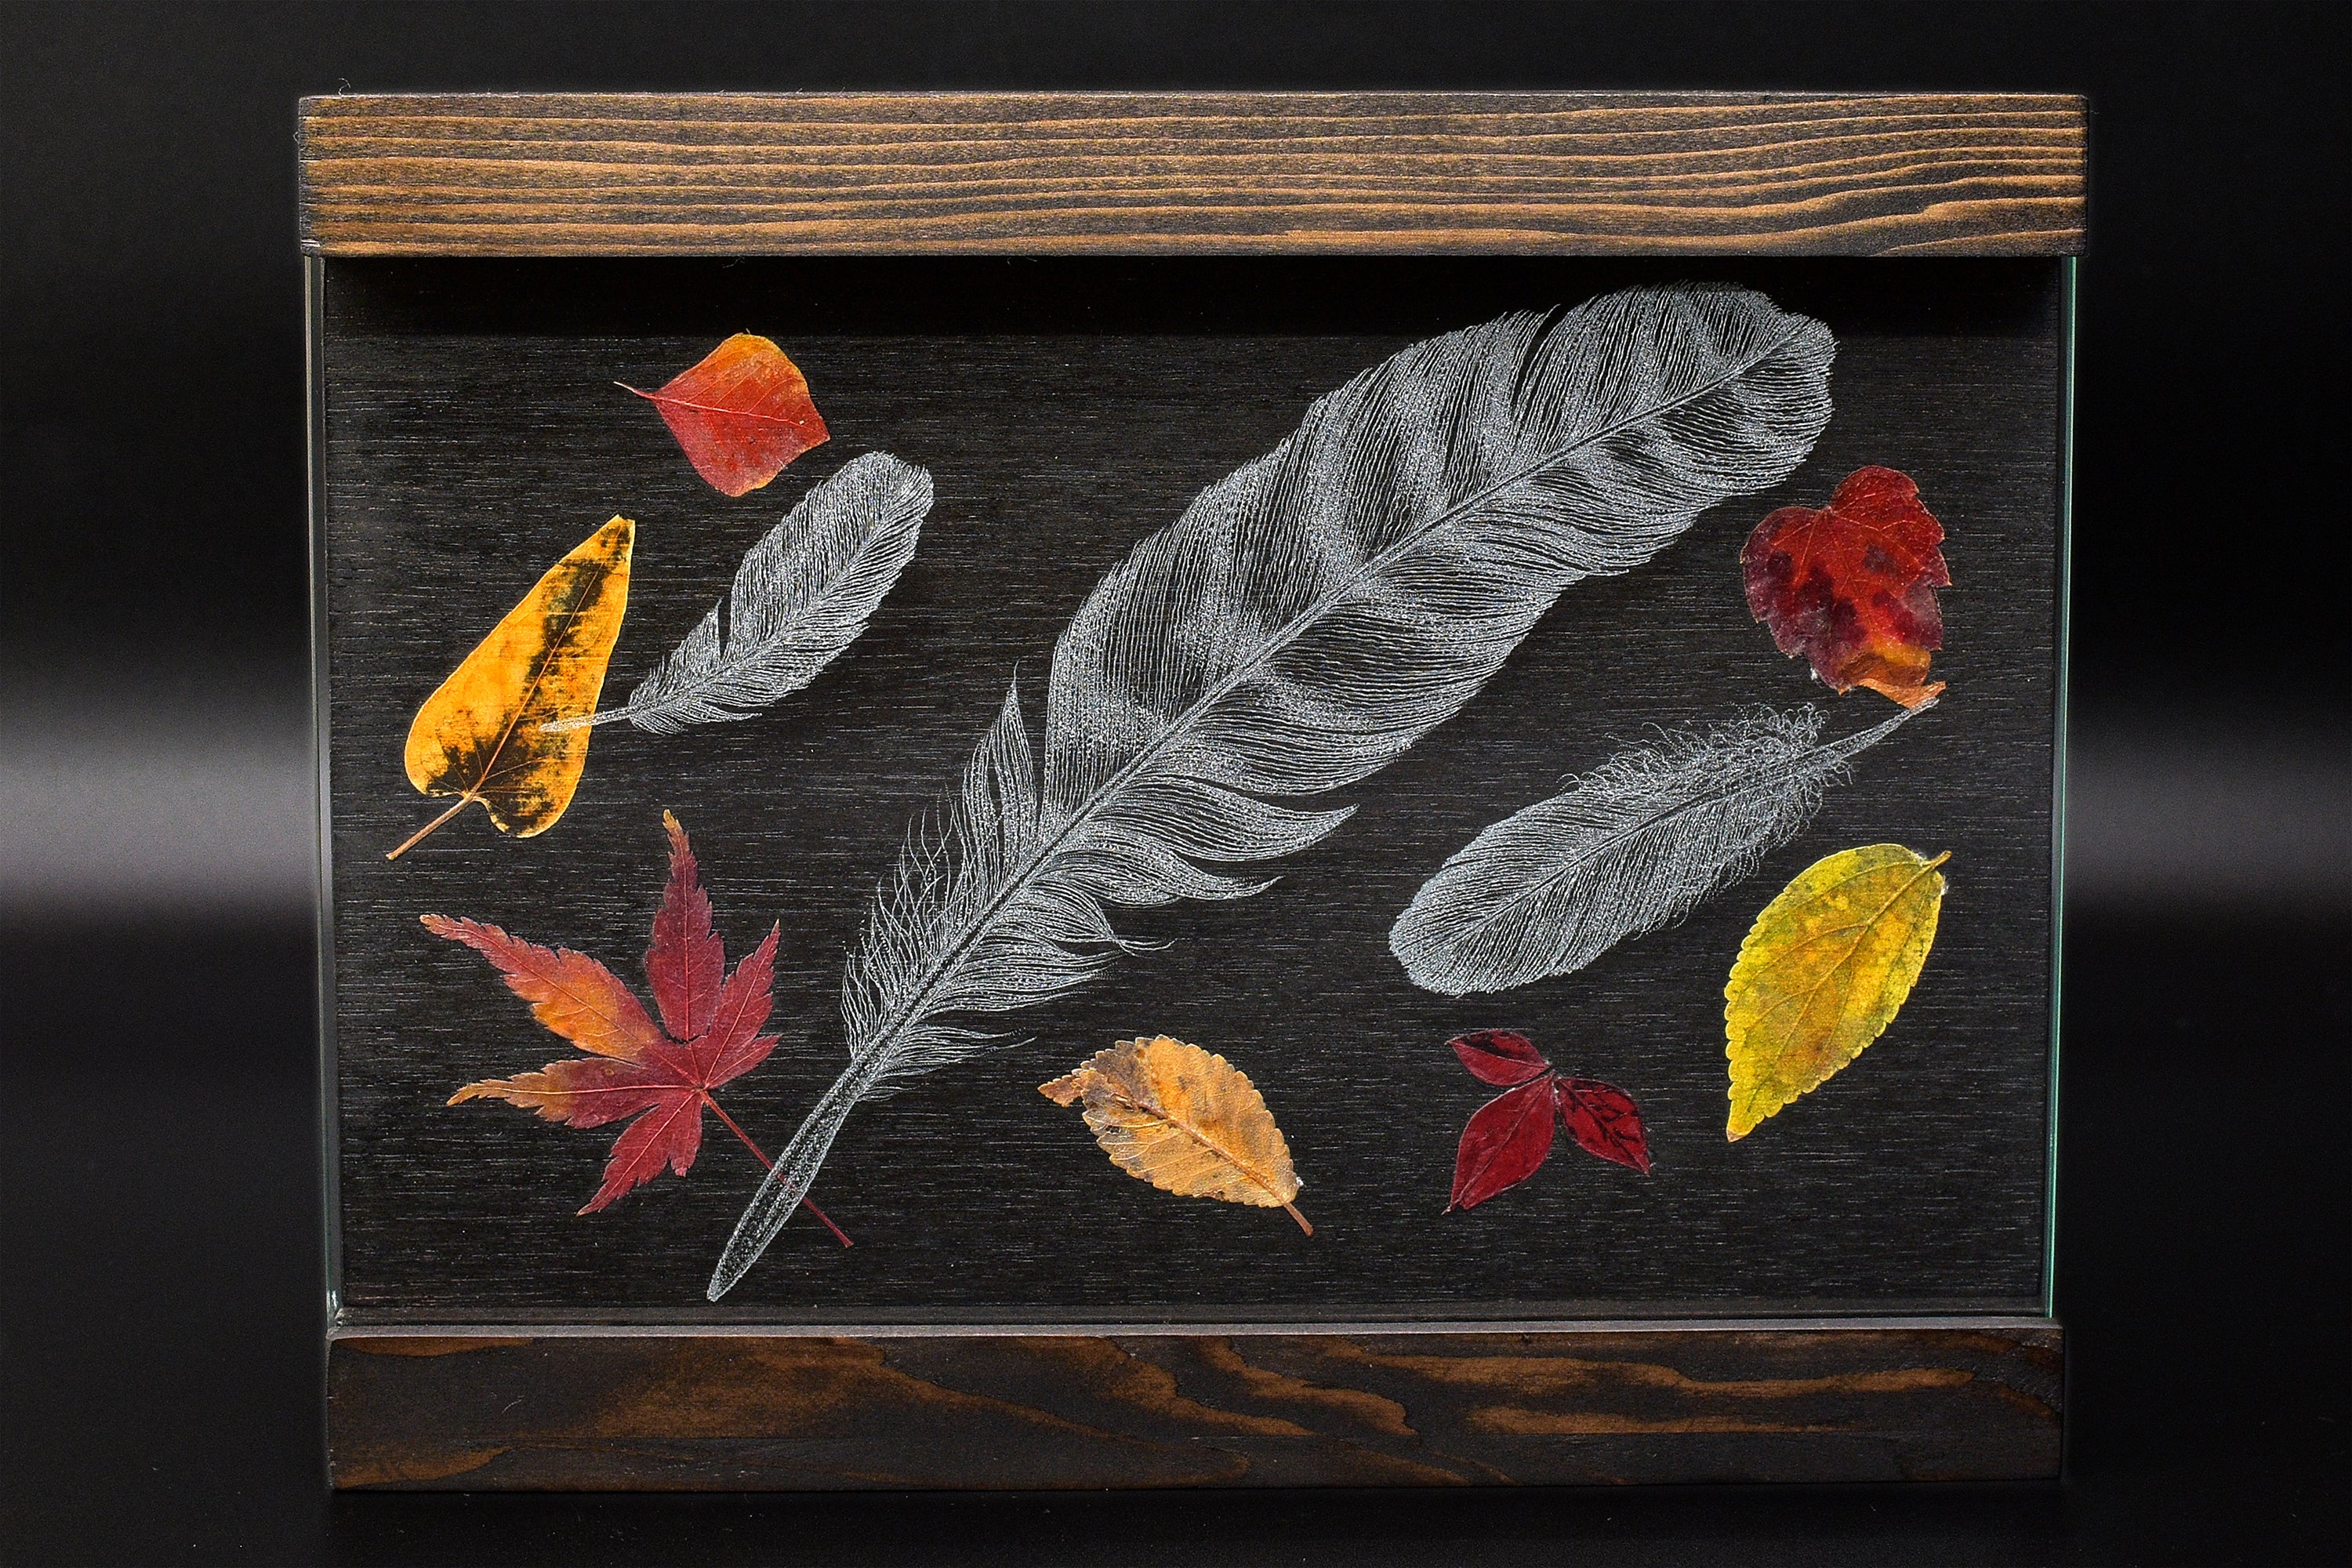 Dominic Fondé and Junko Tominaga, Hane 羽根 Feather, Drill engraved sheet glass, dried pressed leaves, handmade wooden frame, £500